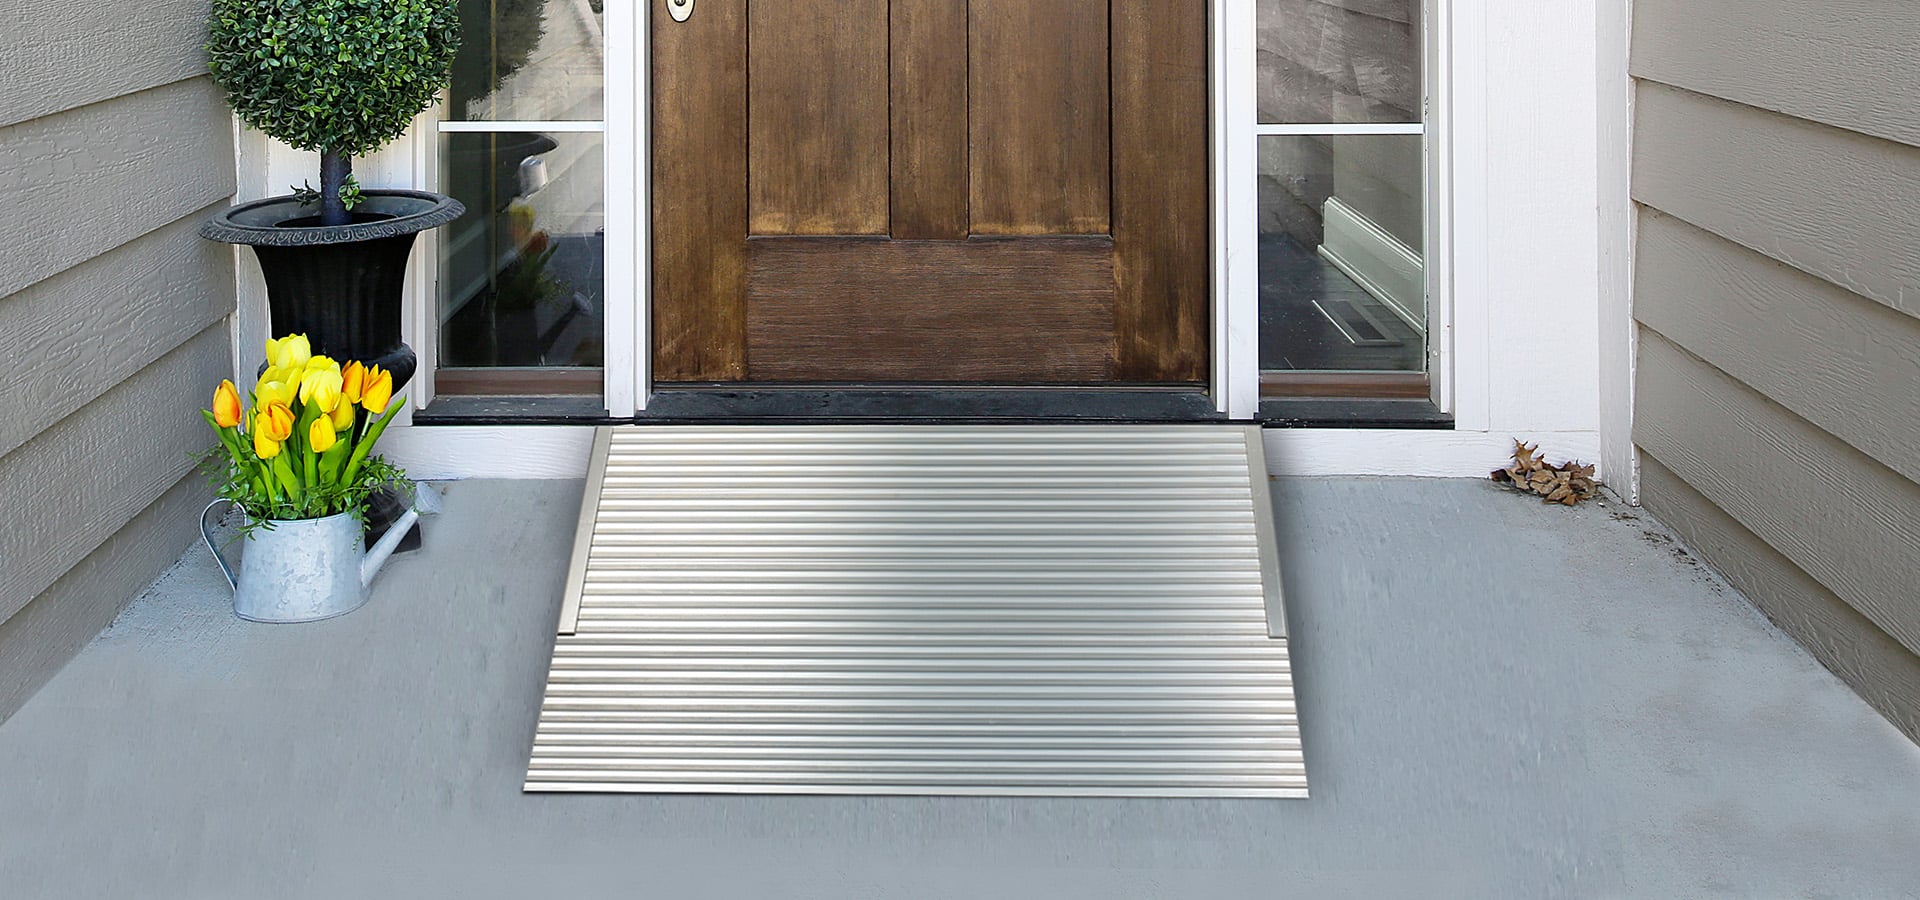 Aluminum Threshold Access Home Ramp for Front Door Step